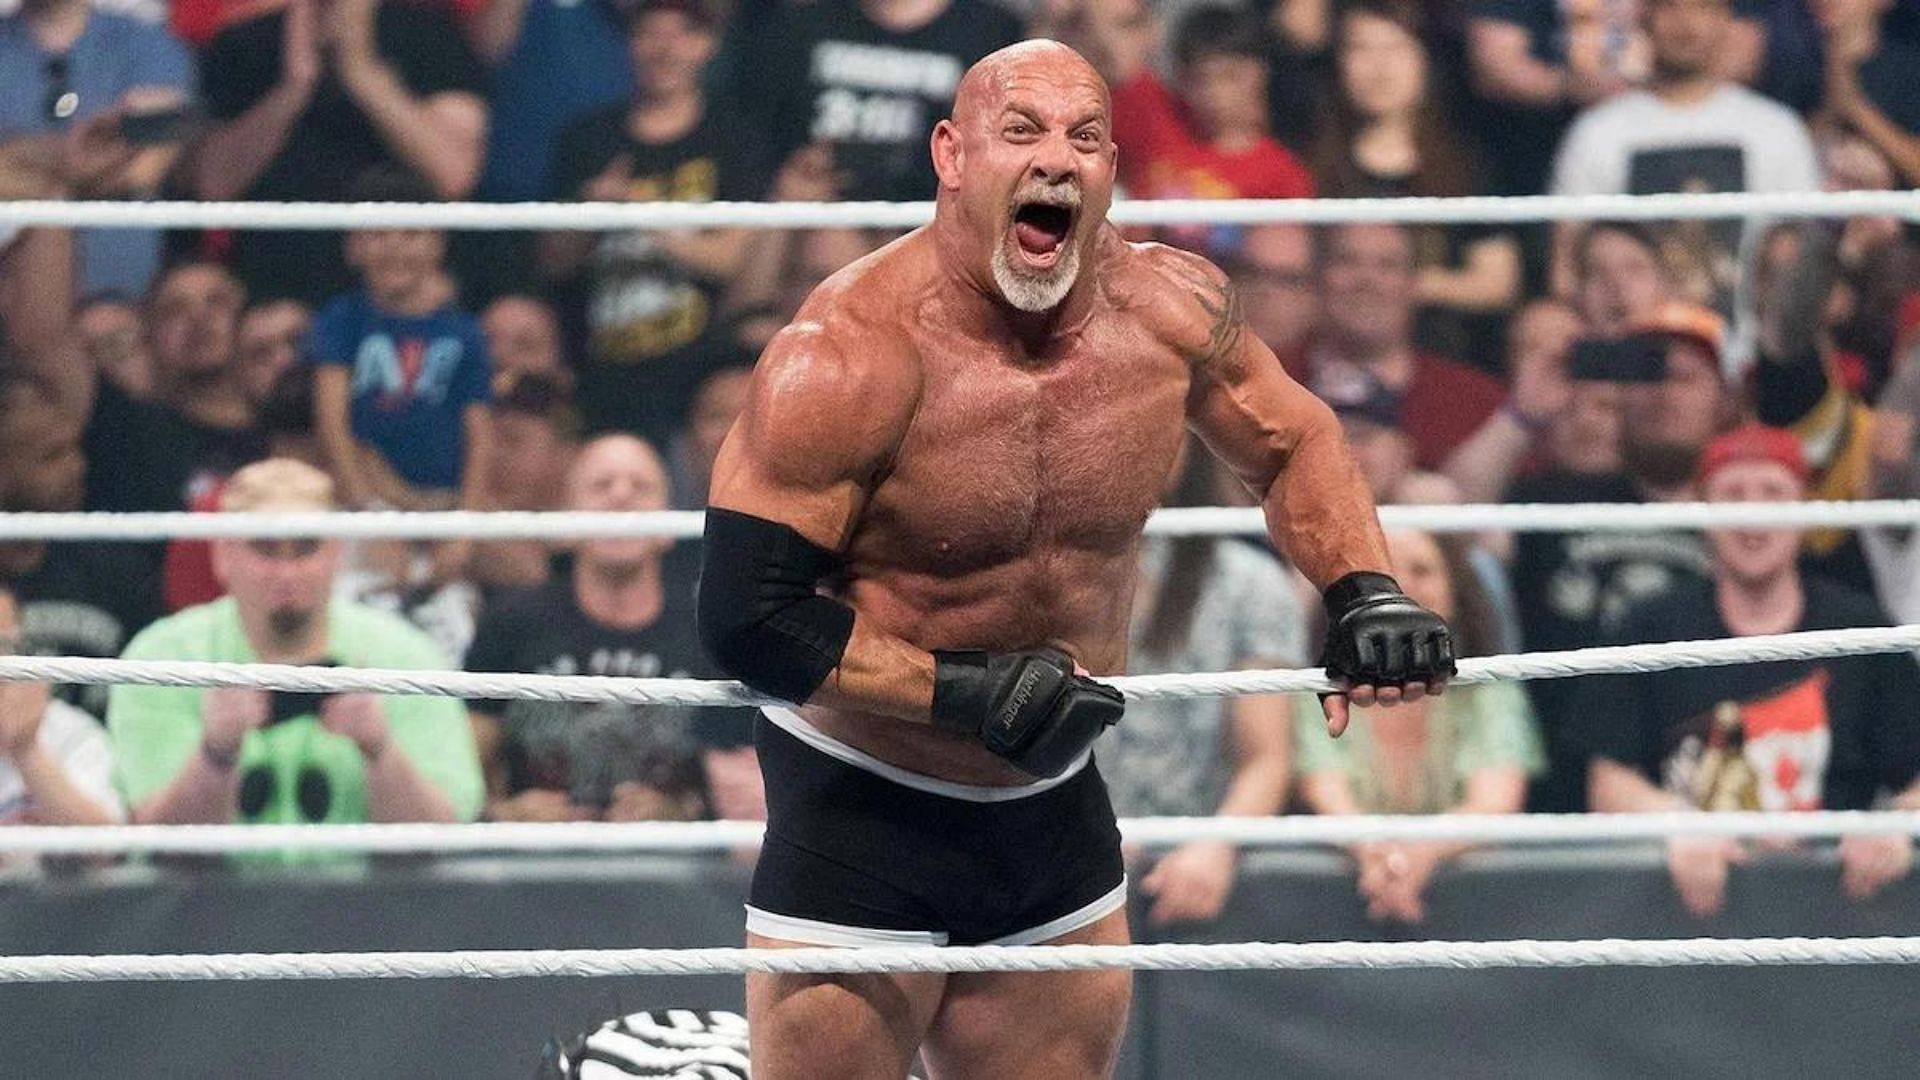 Goldberg is a WWE Hall of Famer and a WCW icon